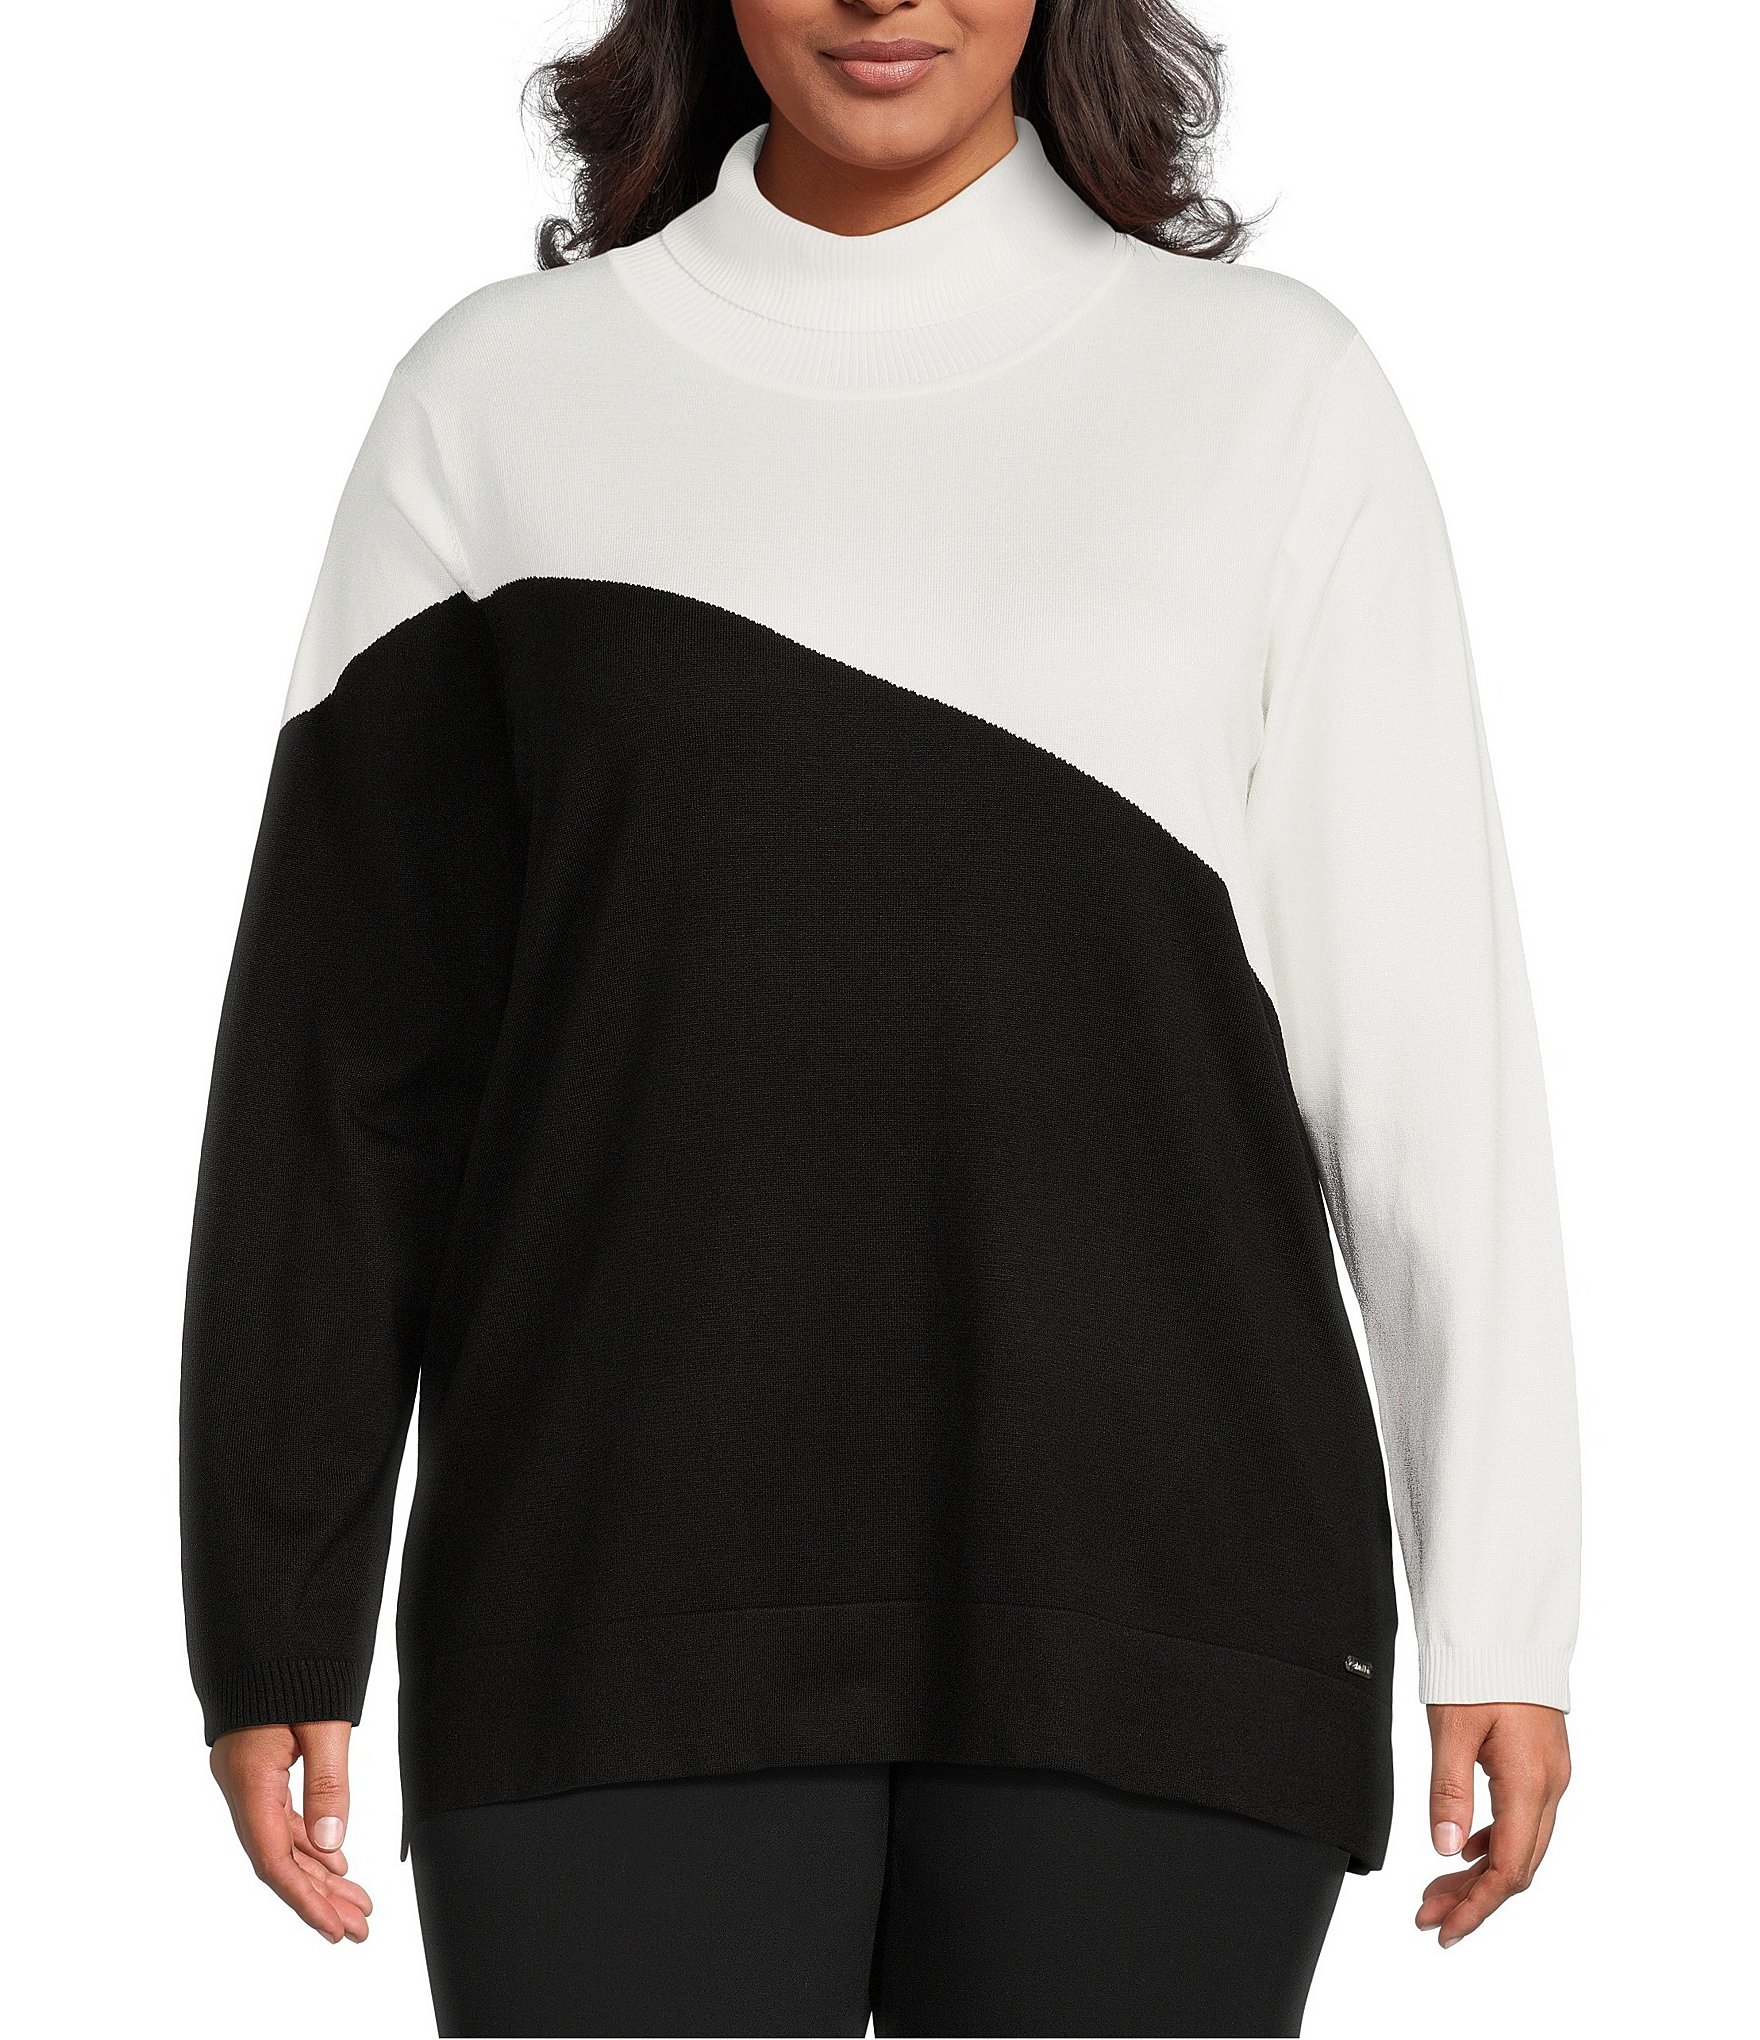 V Neck Long Sleeve Tops for Women Plus Size Fashion Color Block